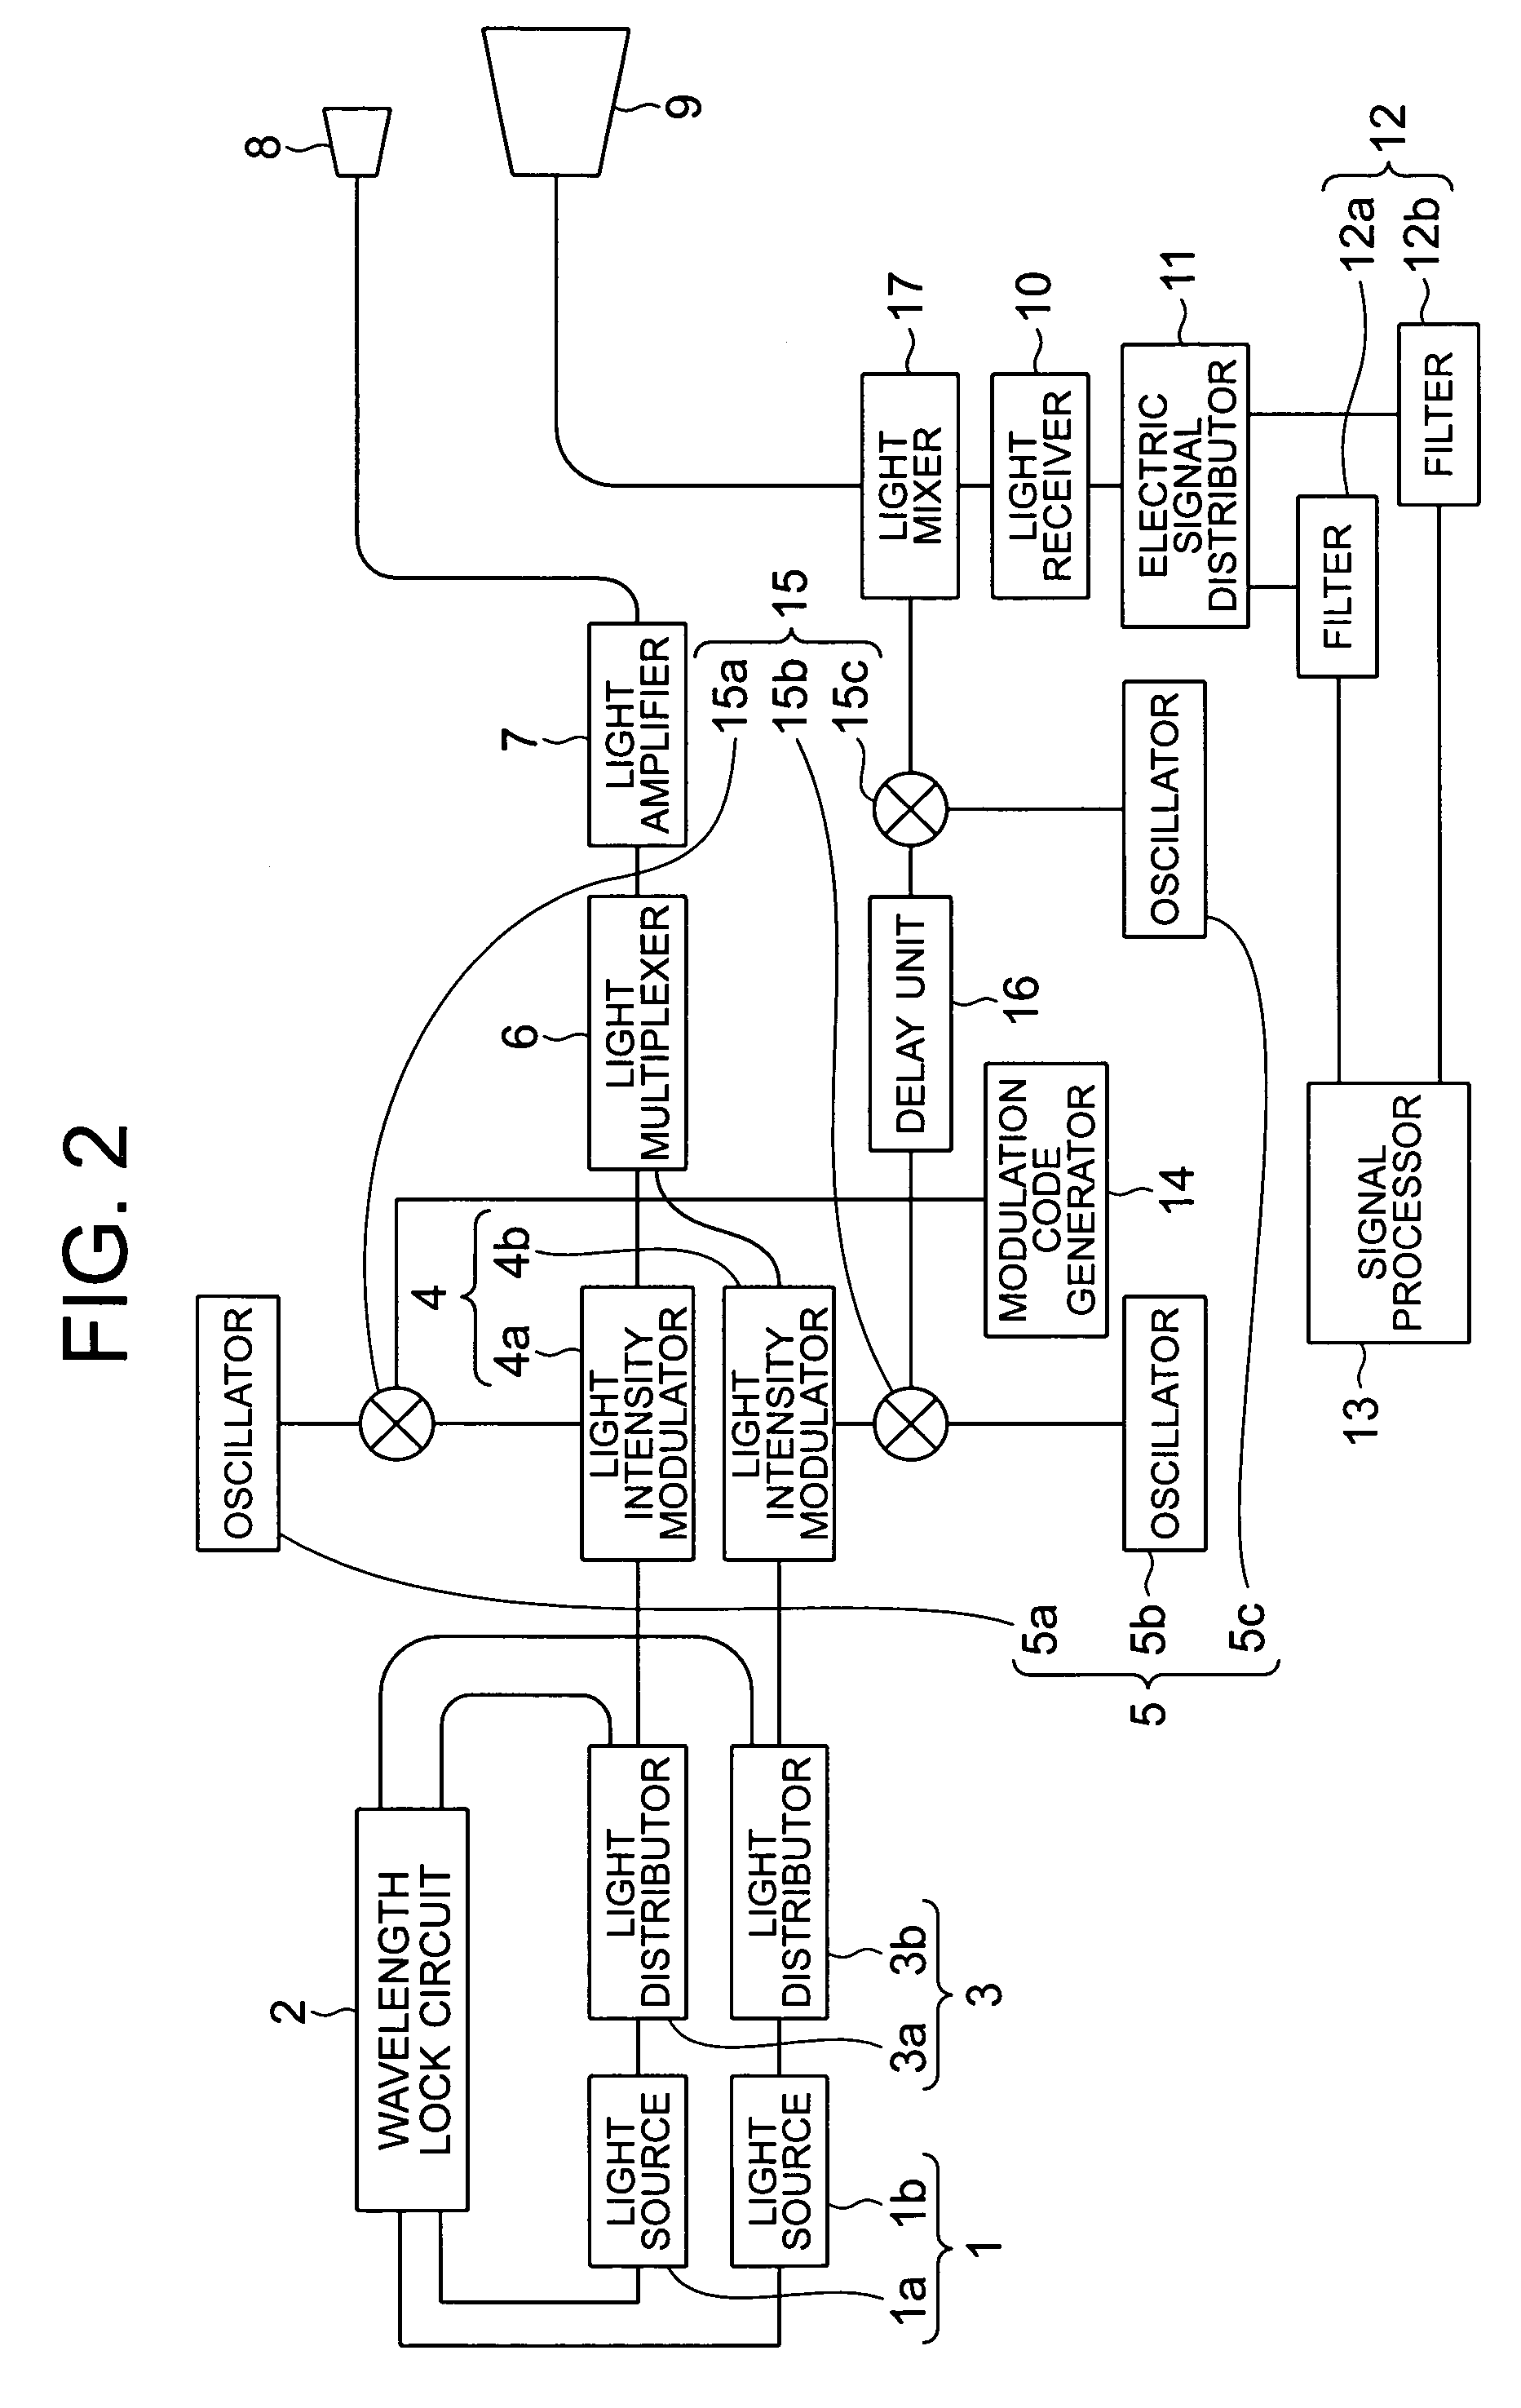 Differential absorption lidar apparatus having multiplexed light signals with two wavelengths in a predetermined beam size and beam shape